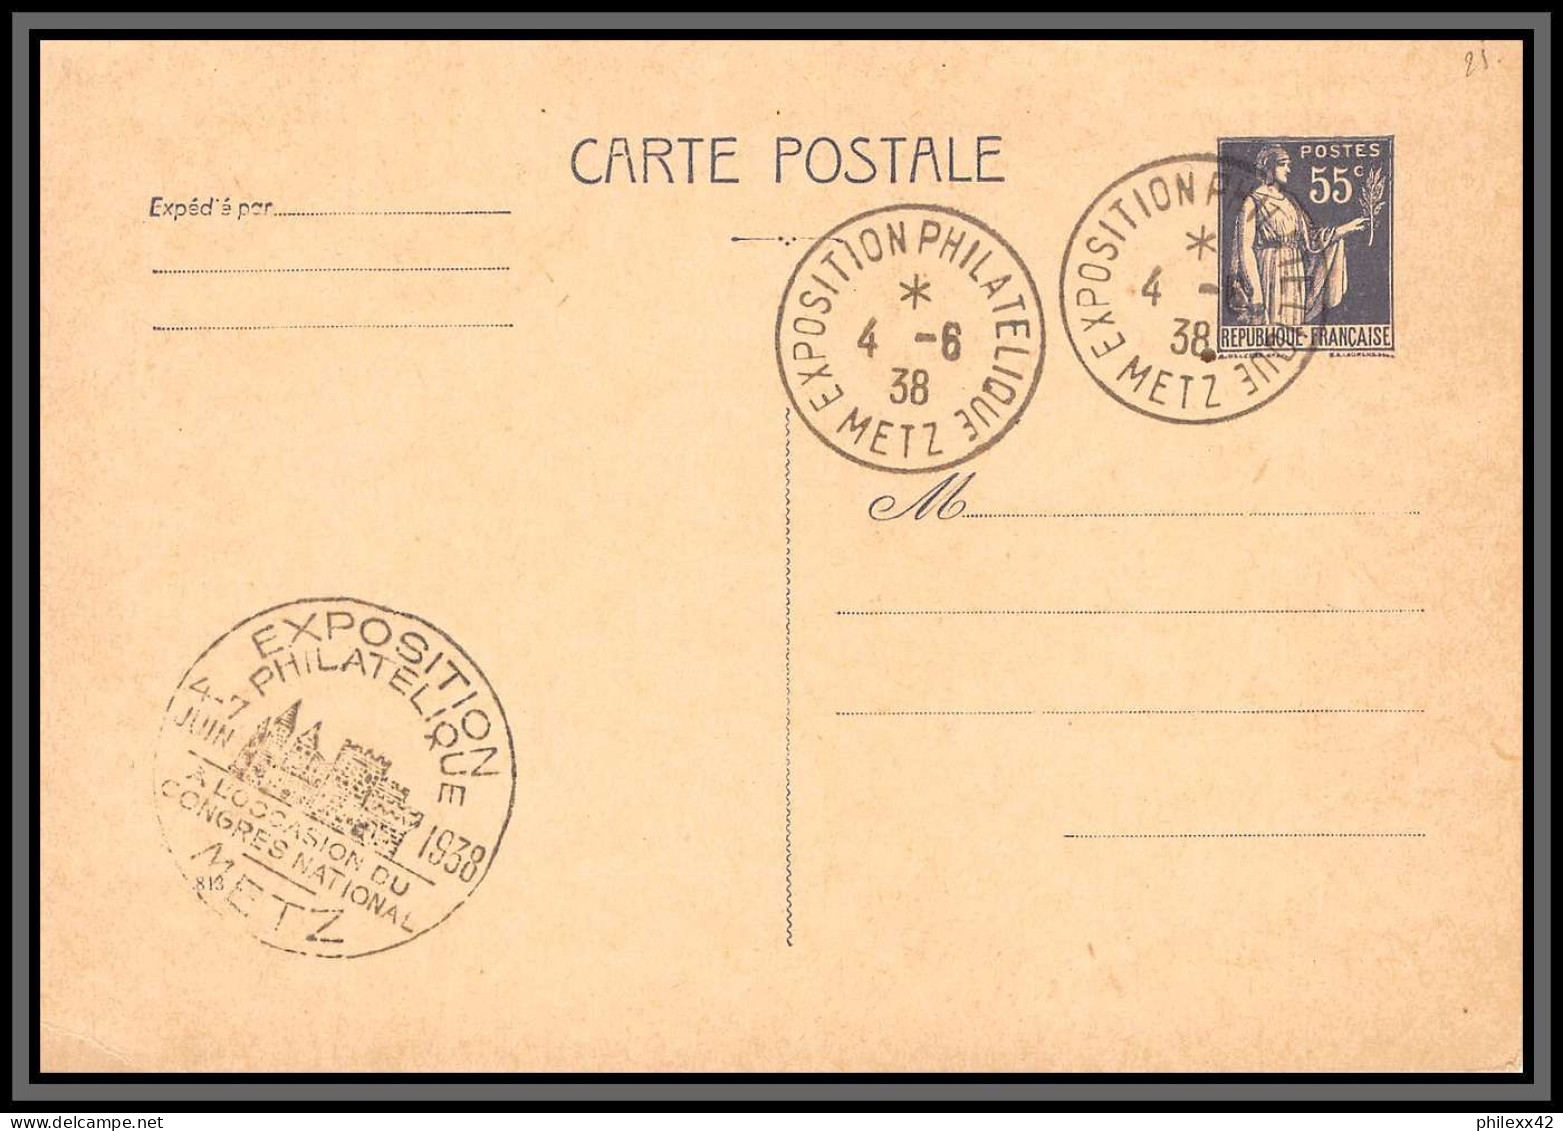 75158 55c Violet PAI C2a Paix Exposition Metz 1938 Entier Postal Stationery Carte Postale Postcard France - Standard Postcards & Stamped On Demand (before 1995)